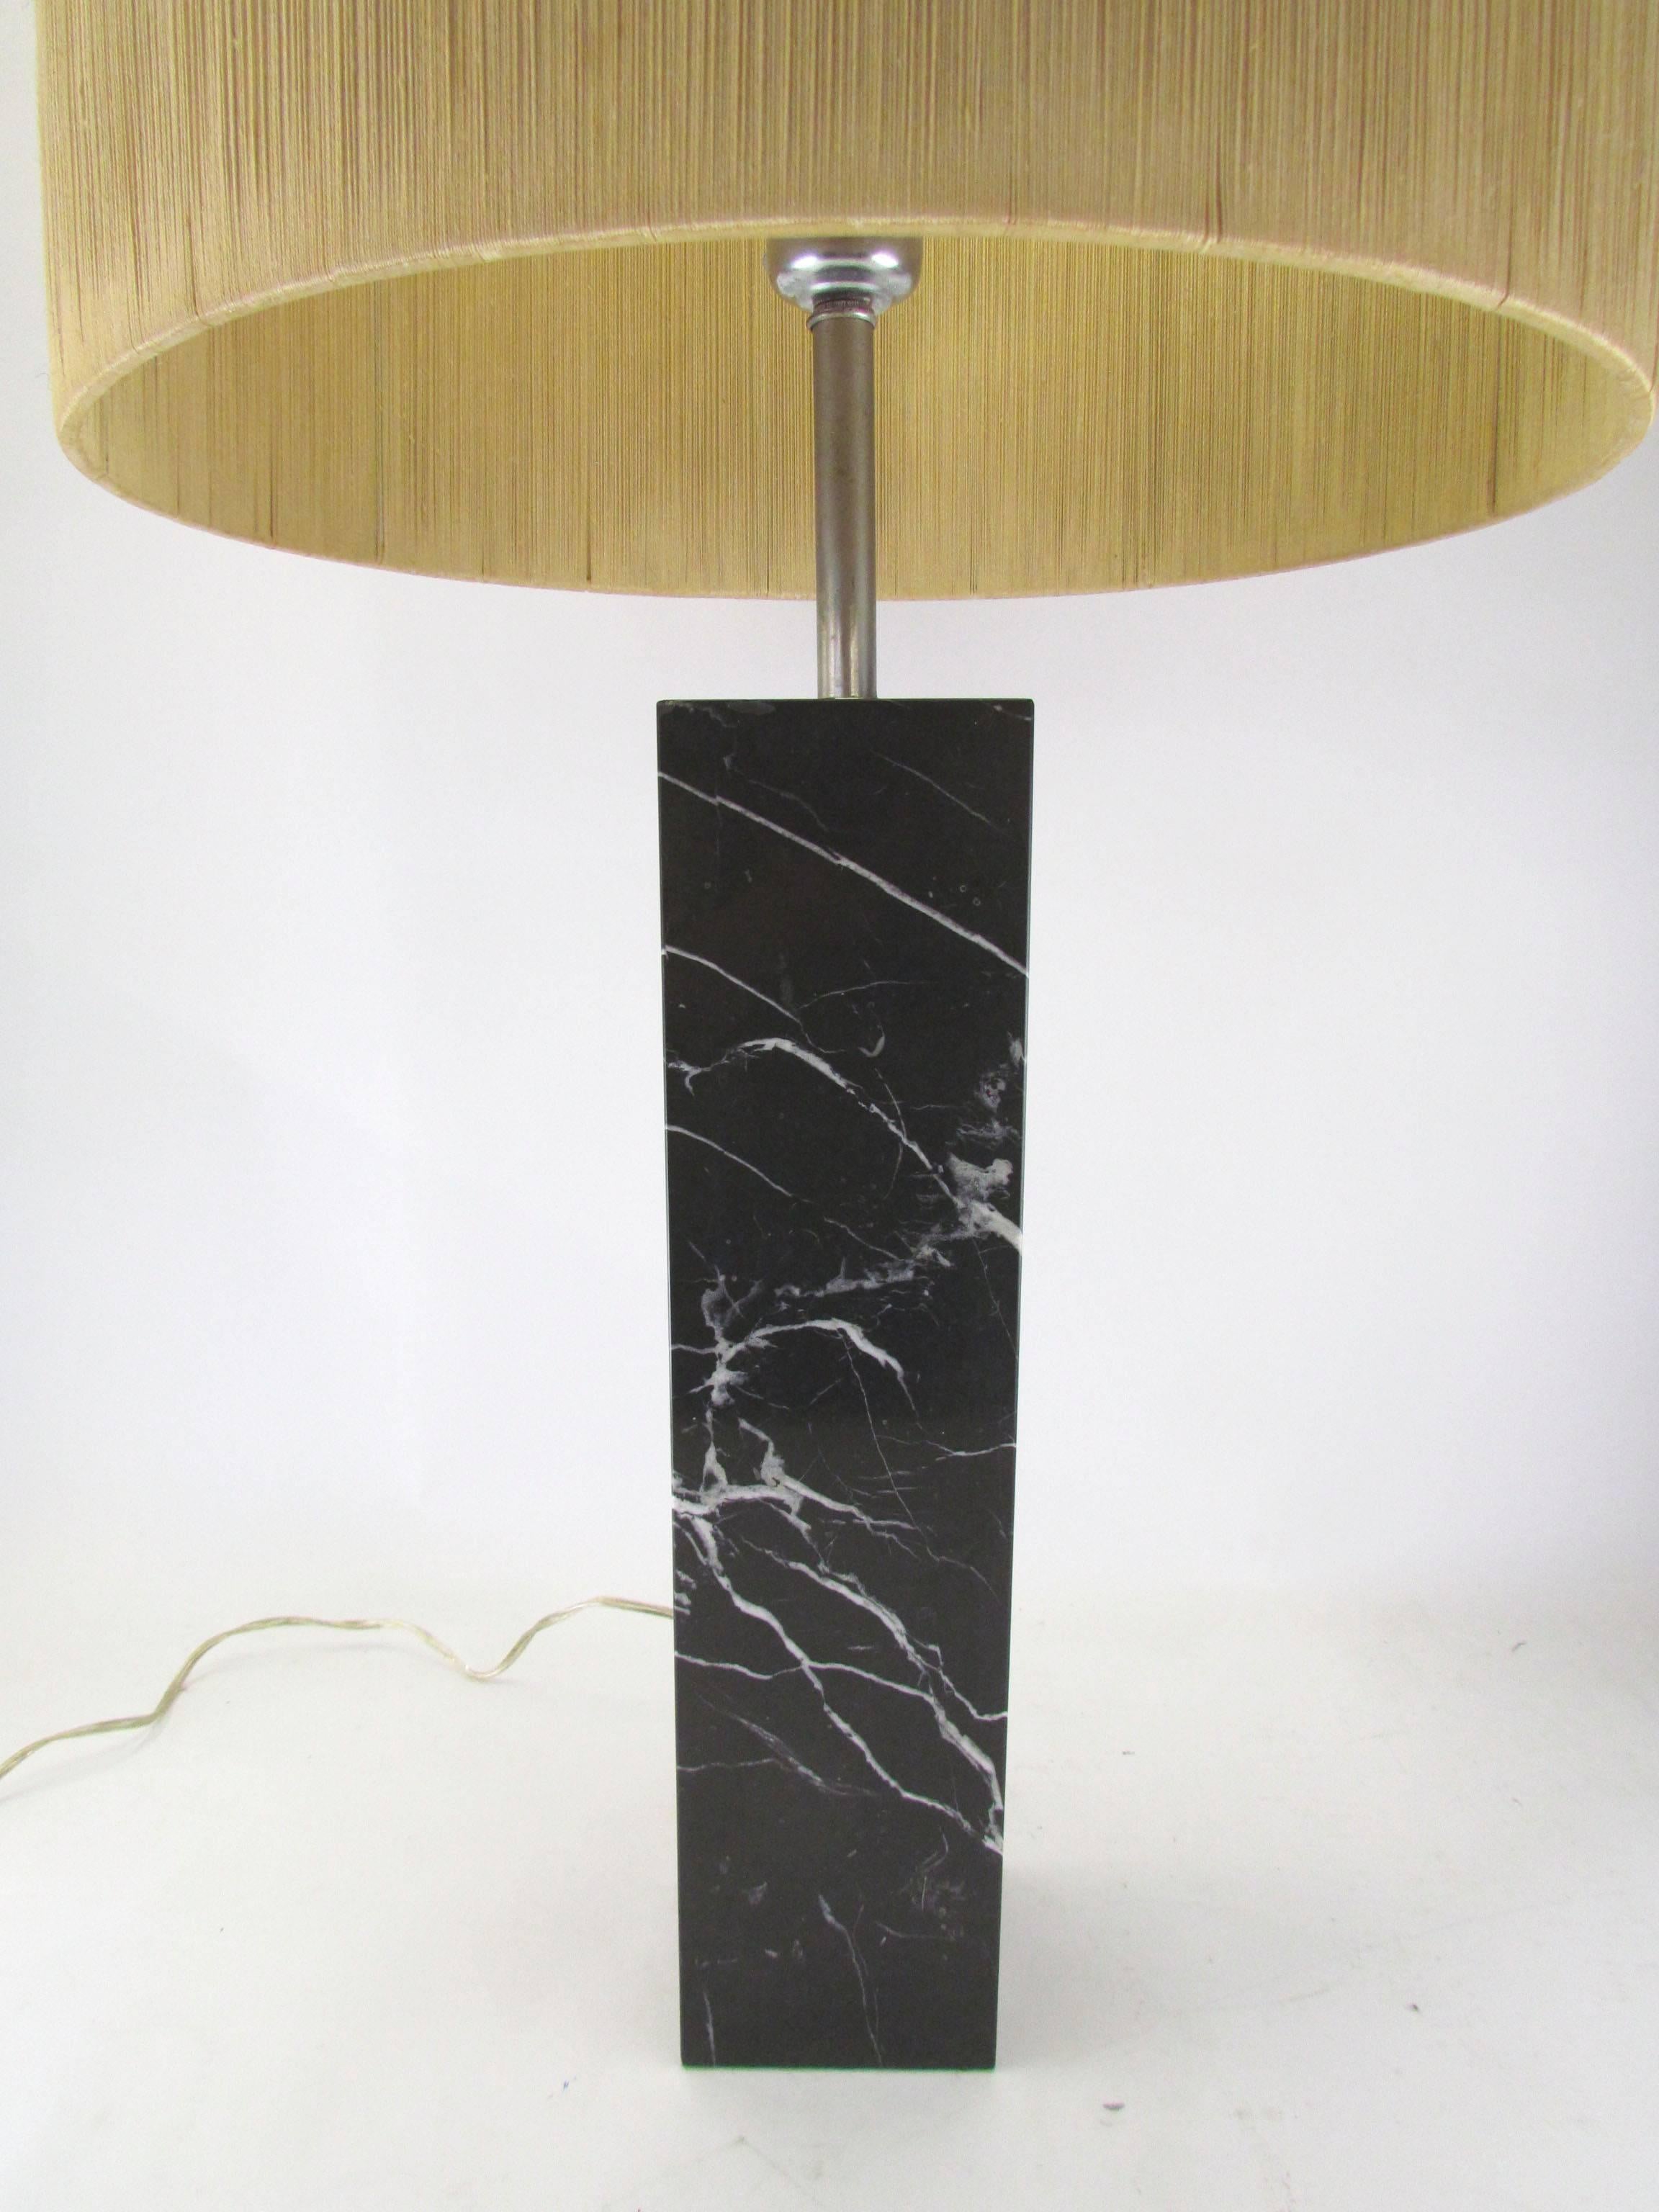 Large-scale rectangular marble table lamp by Nessen Studios, with original milk glass diffuser and original string shade.

Overall height with shade: 37